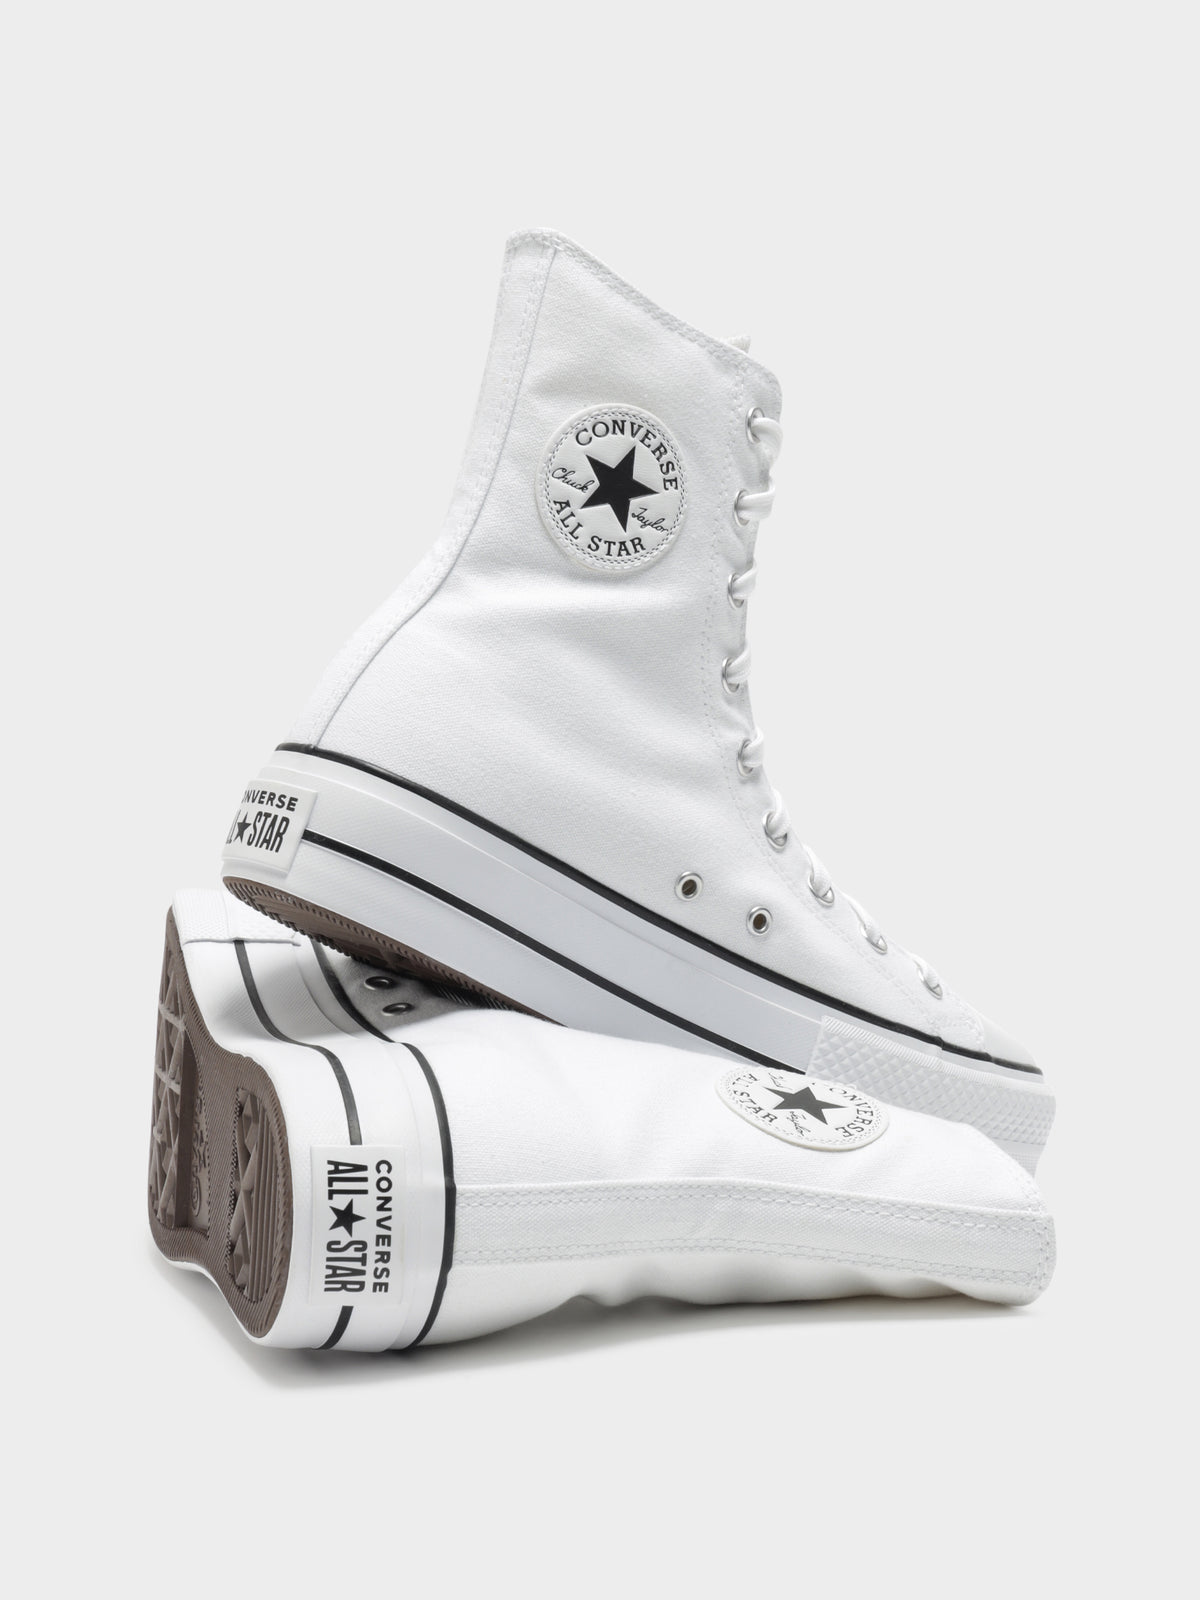 Womens Chuck Taylor All Star Lift X High Sneakers in White